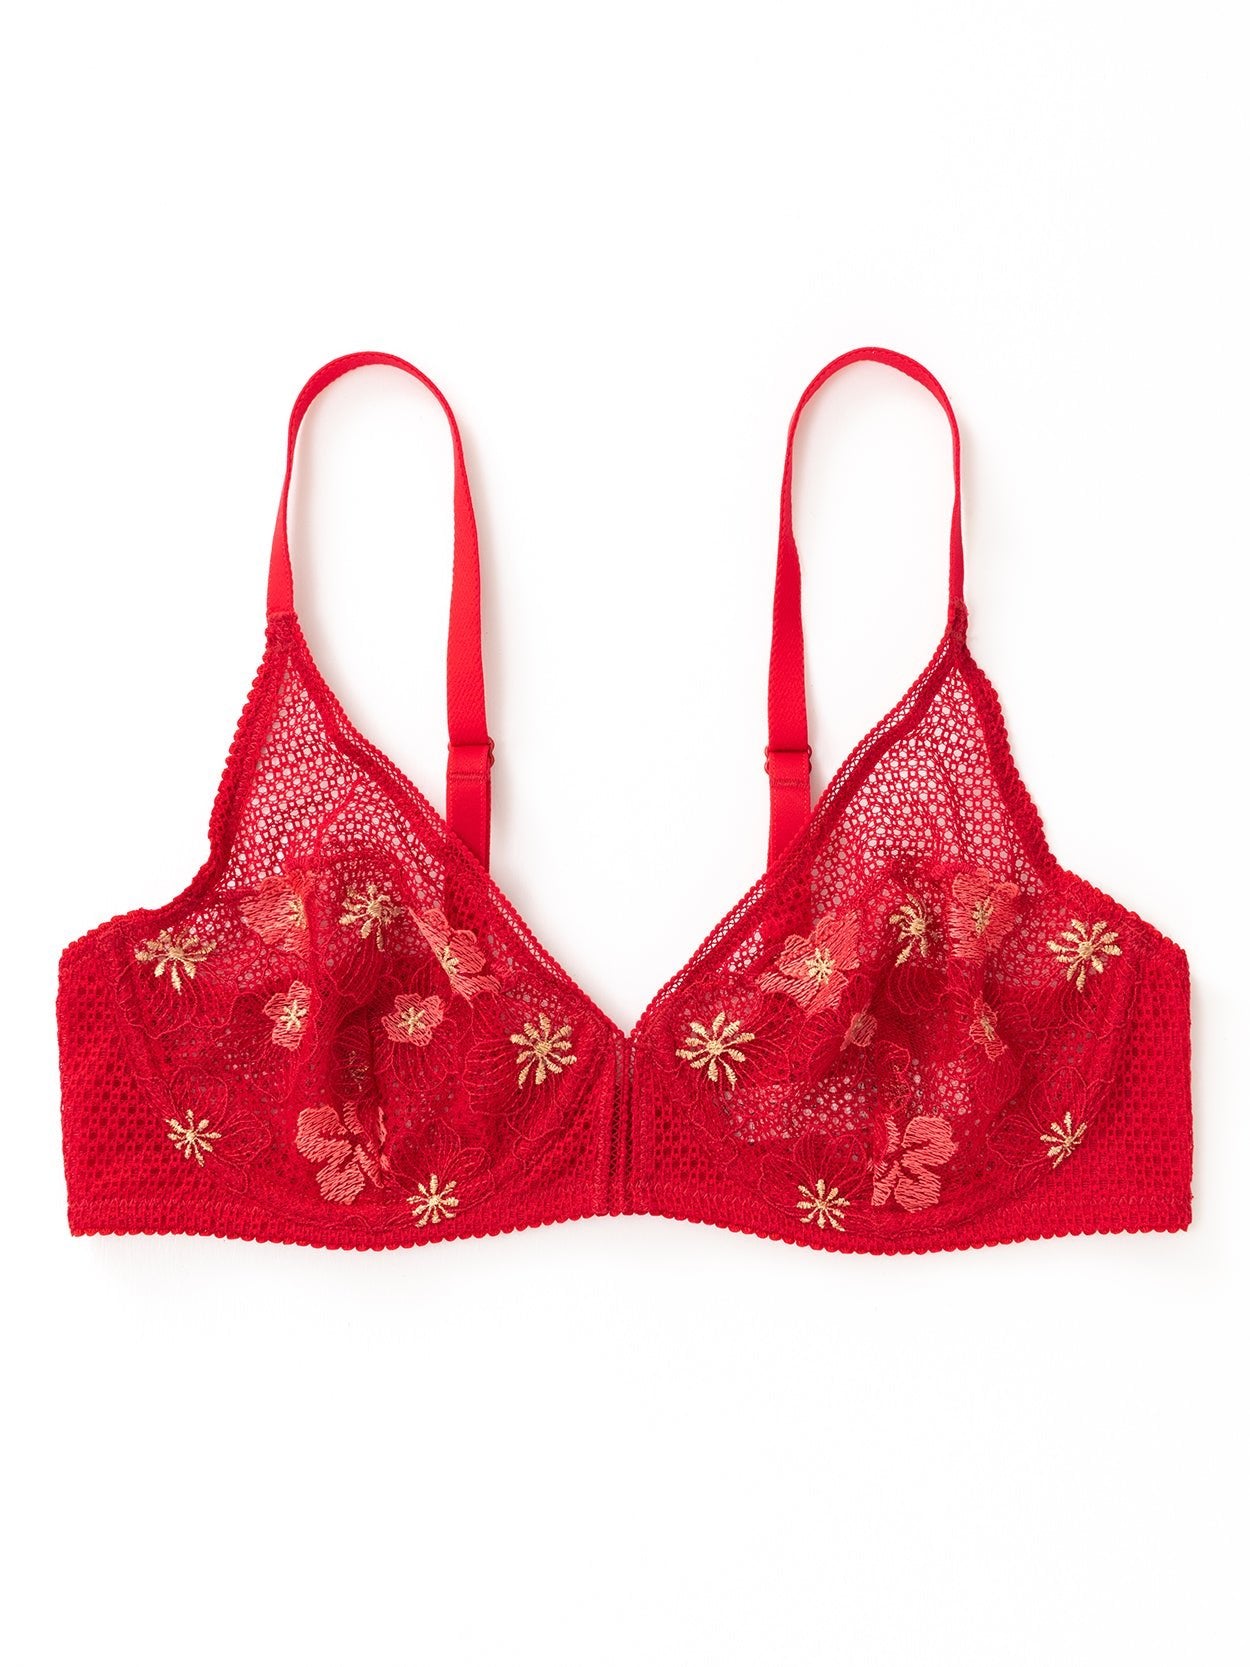 Secrets In Lace Sale, Vogue's Secret Women's Sexy Sheer Mesh See Through  Bra Non Padded Unlined Lace Bralette Underwire Bras - red - 42D.